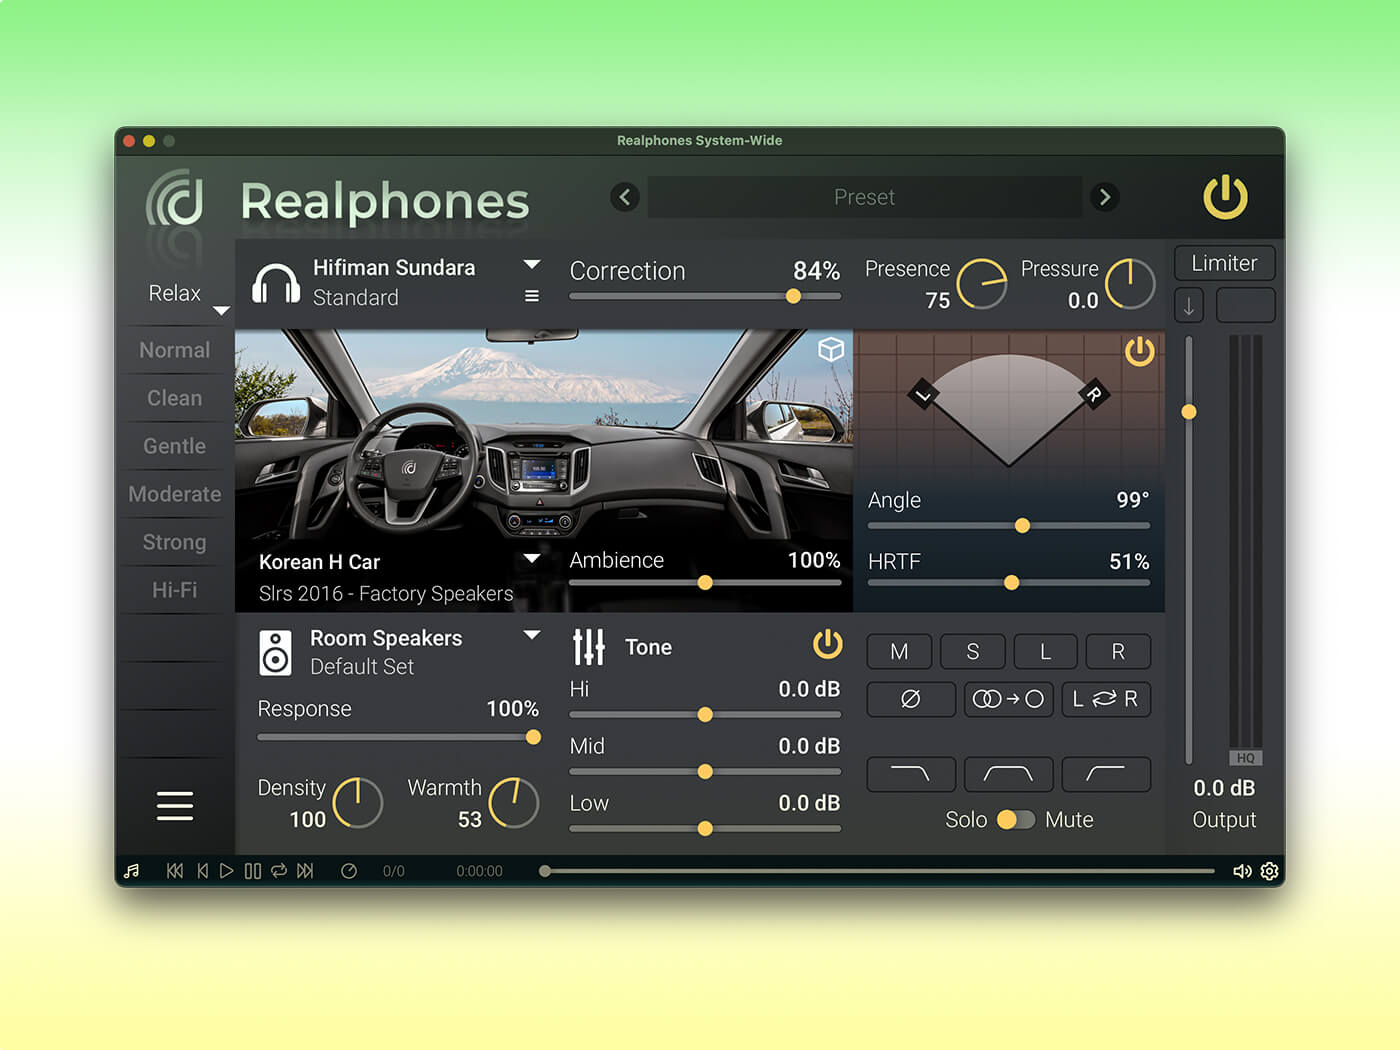 Simulating an in-car system on Realphones 2.0